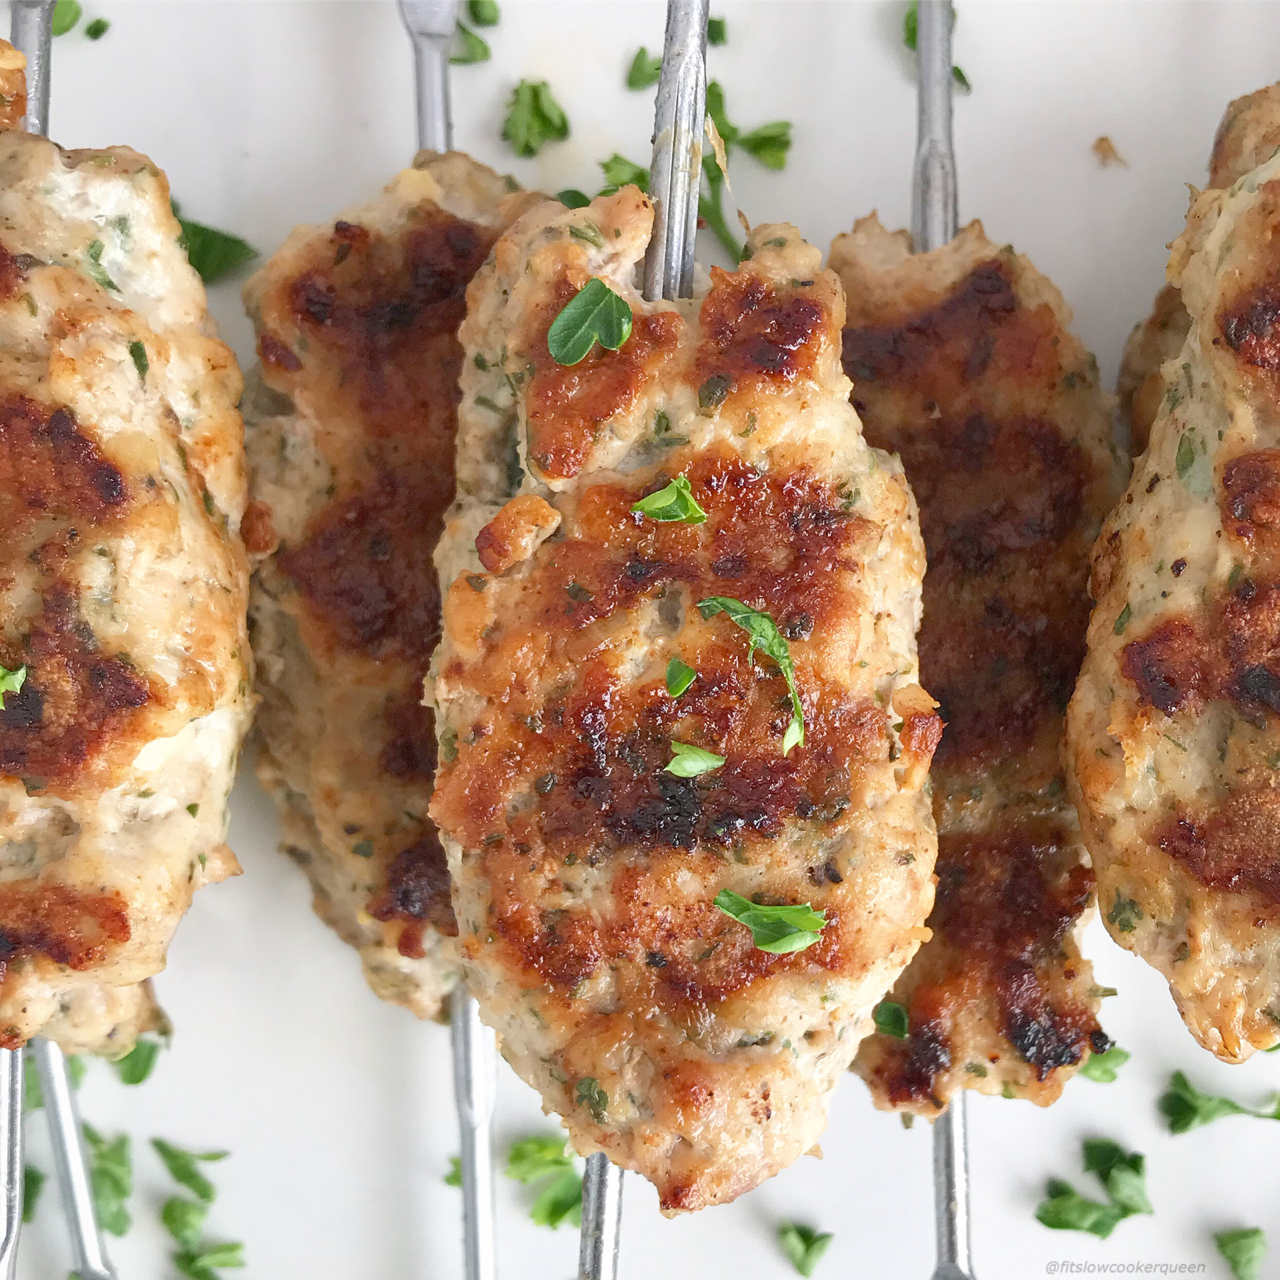 Chicken kofta is a simple low-carb, paleo, and whole30 Middle Eastern food that can be served endless ways. And it's done in under 30 minutes!